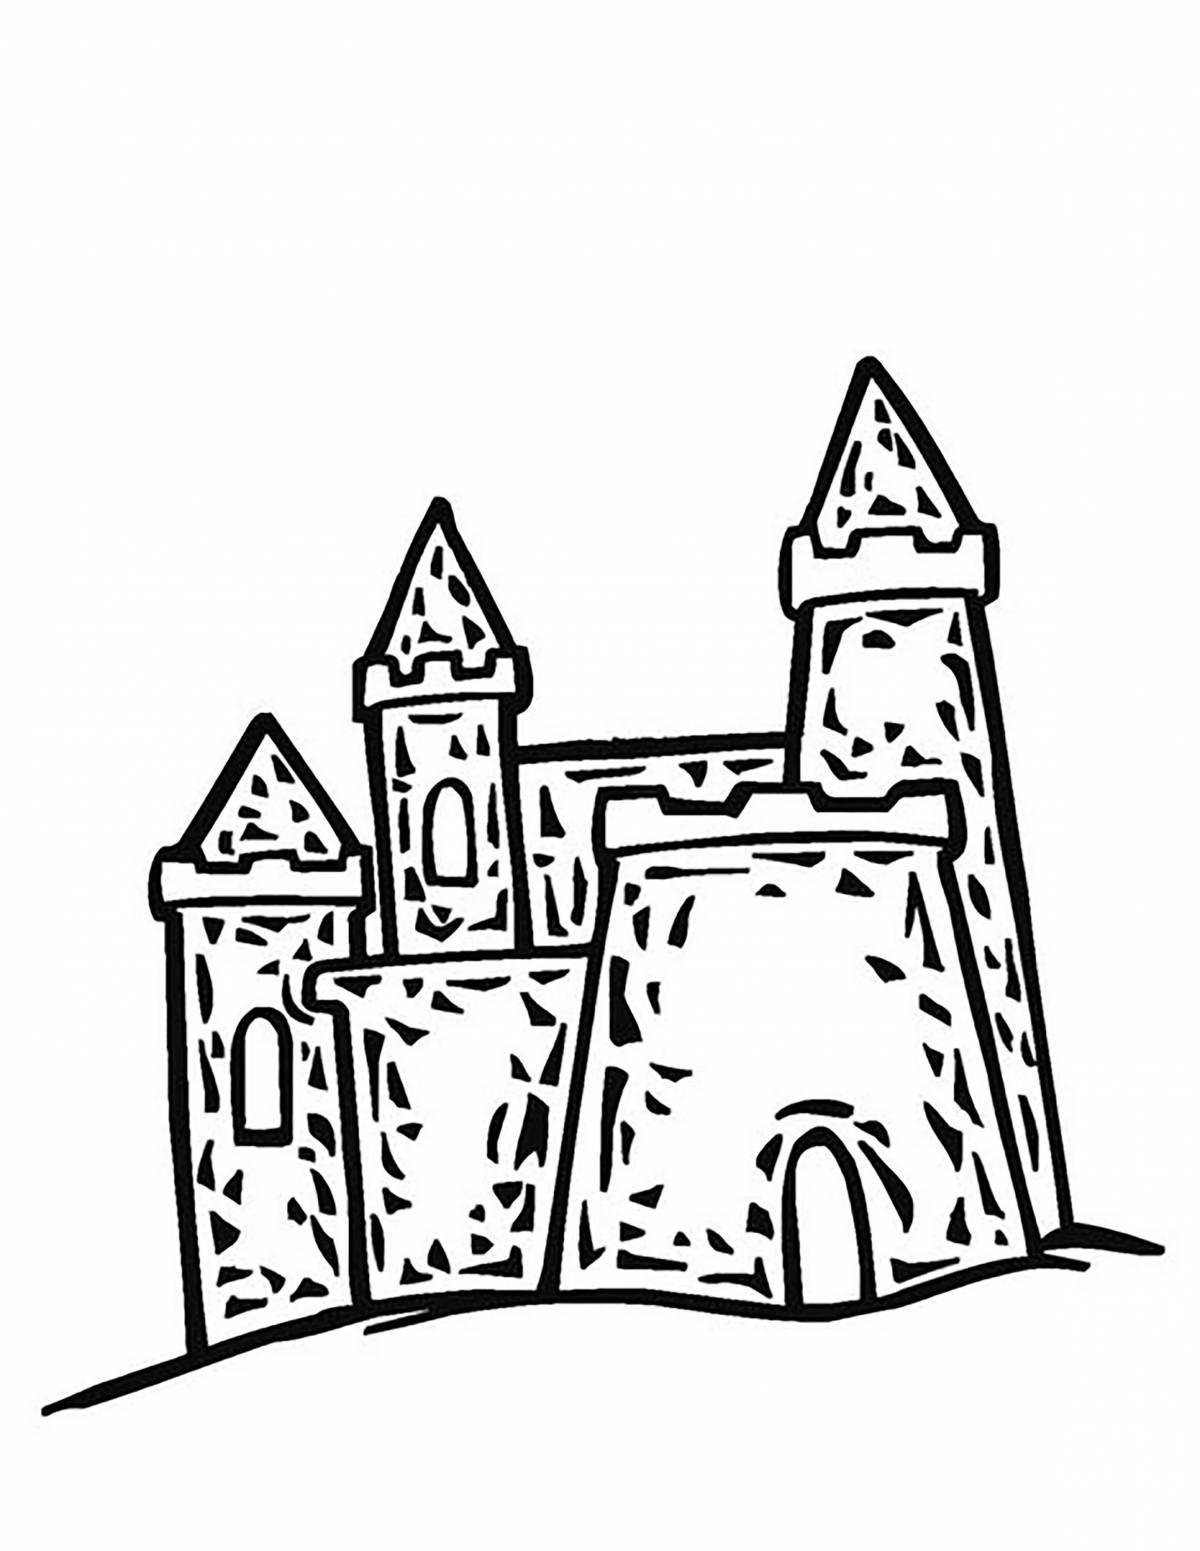 Coloring page of the snow queen's glamorous palace